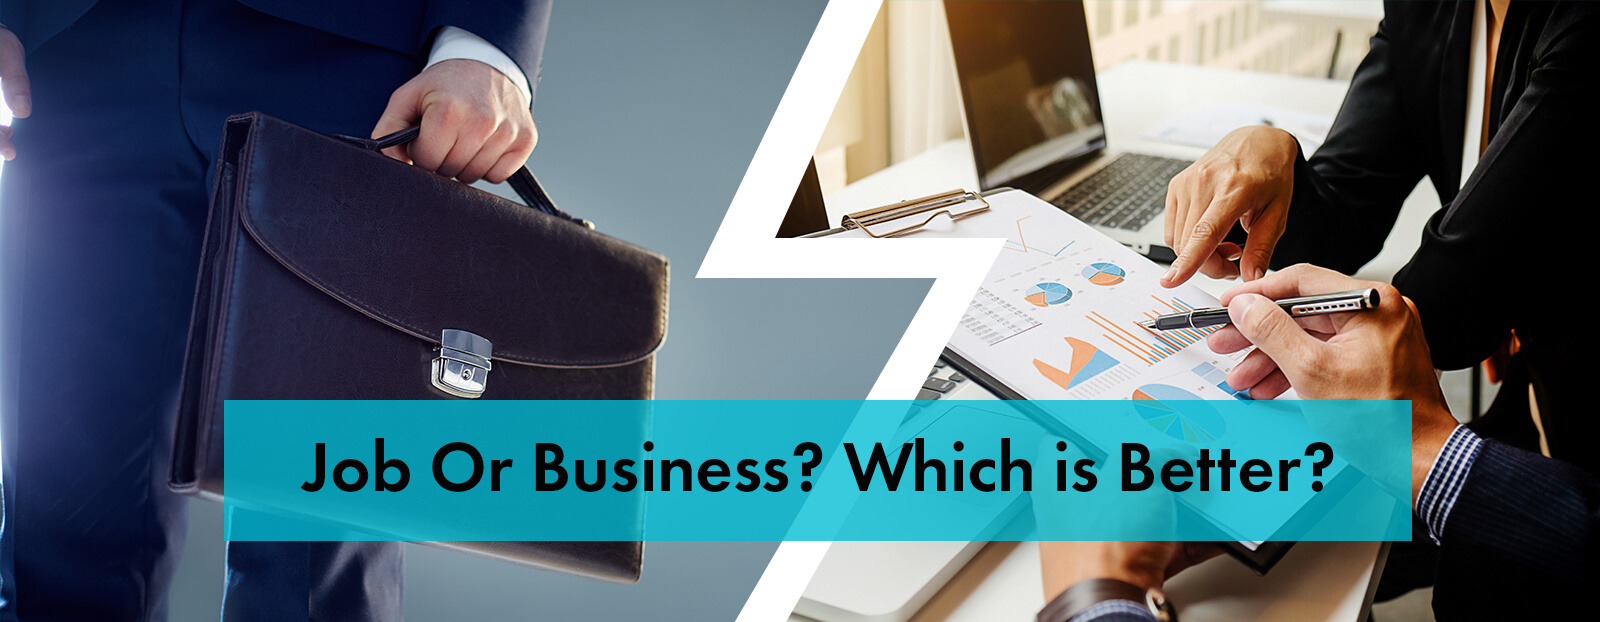 Job Or Business? Which is Better?